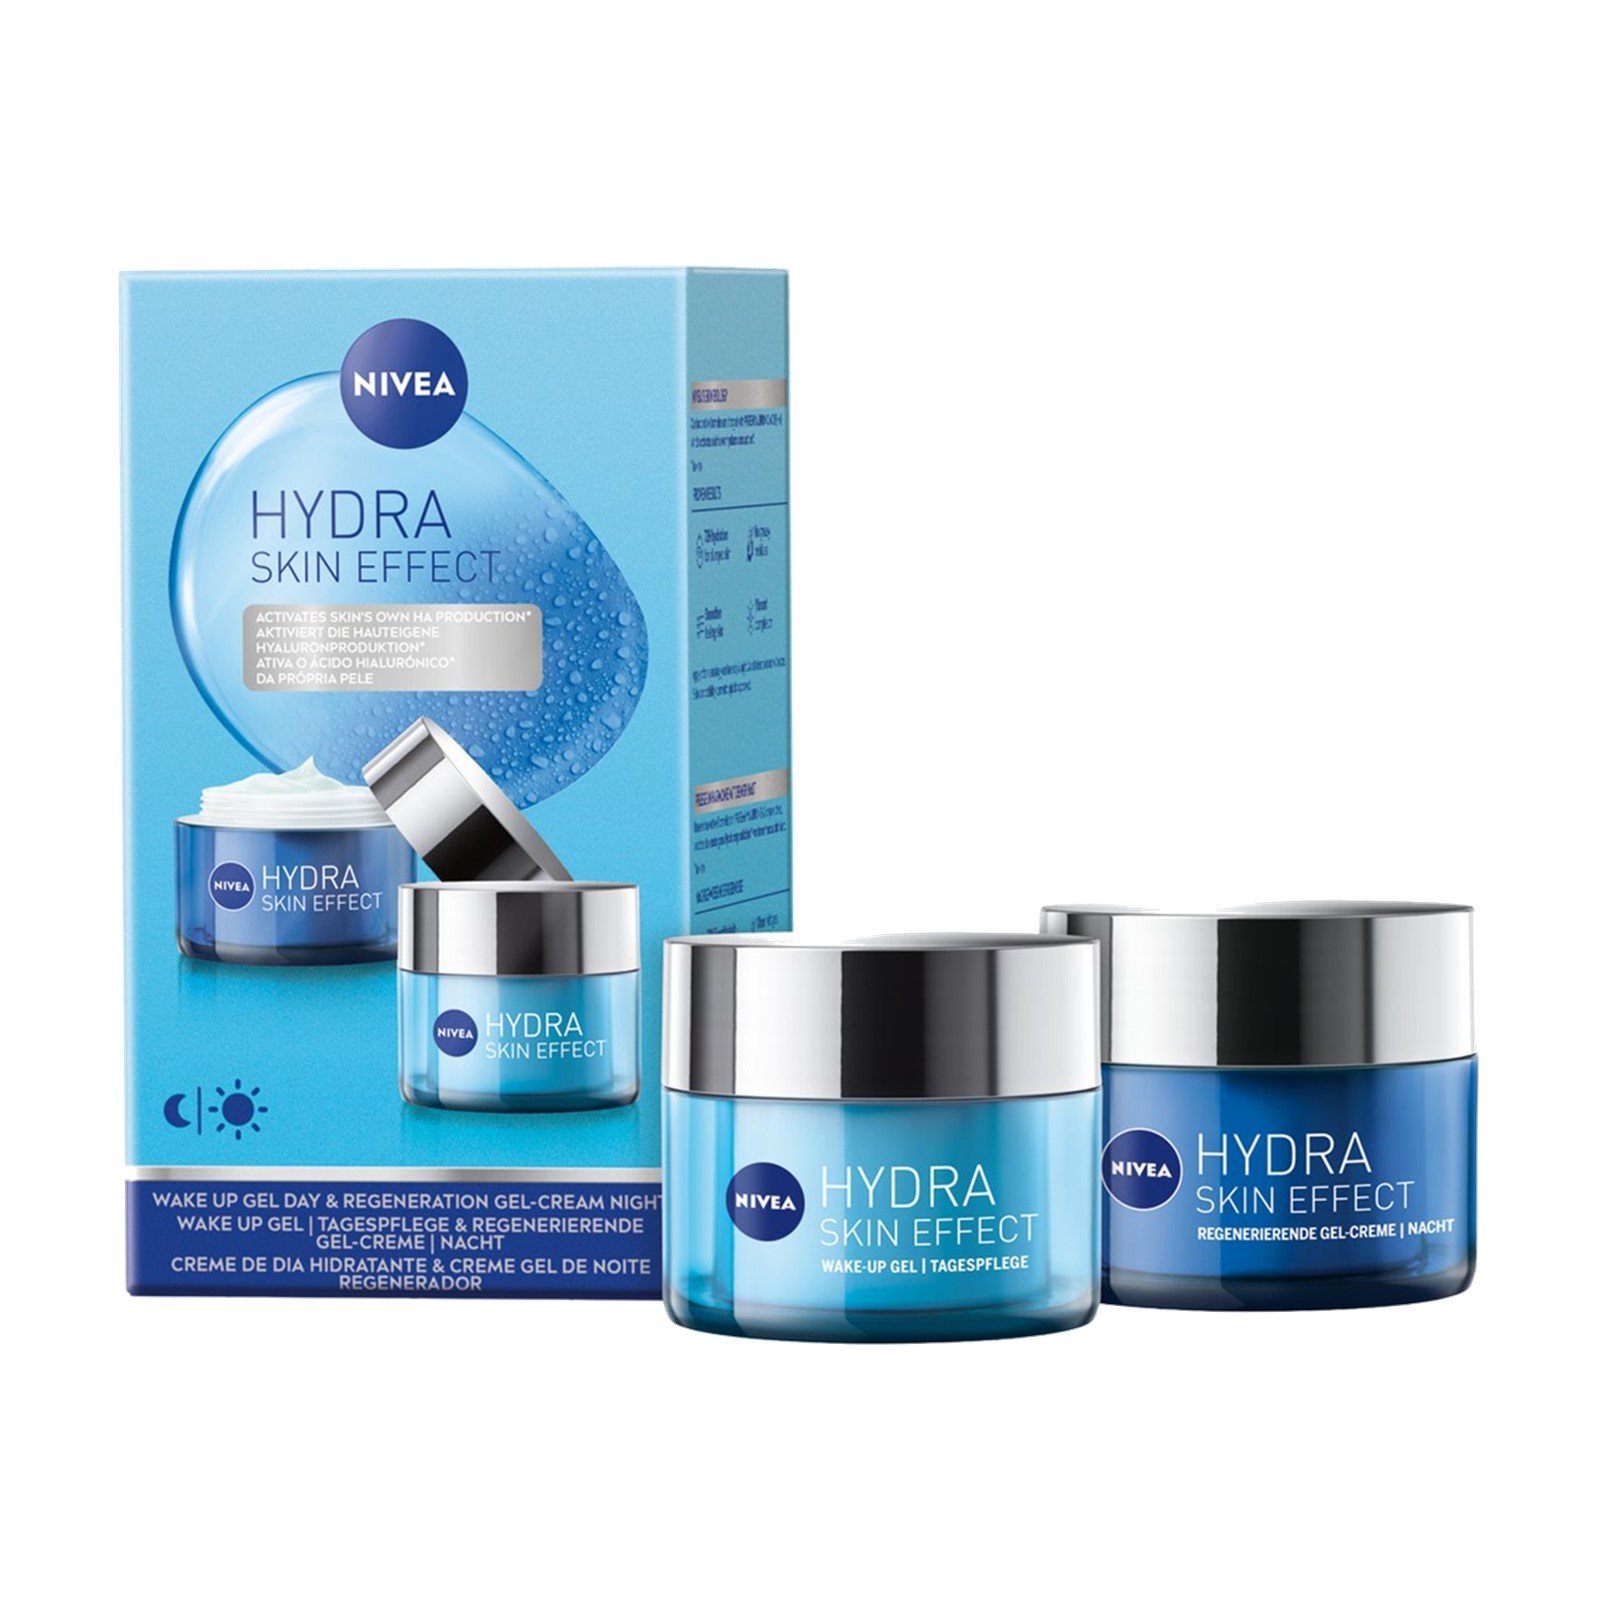 Appartement Zich voorstellen Beugel Buy GIFT SET:Nivea Hydra Skin Effect Day And Night Care Set · USA